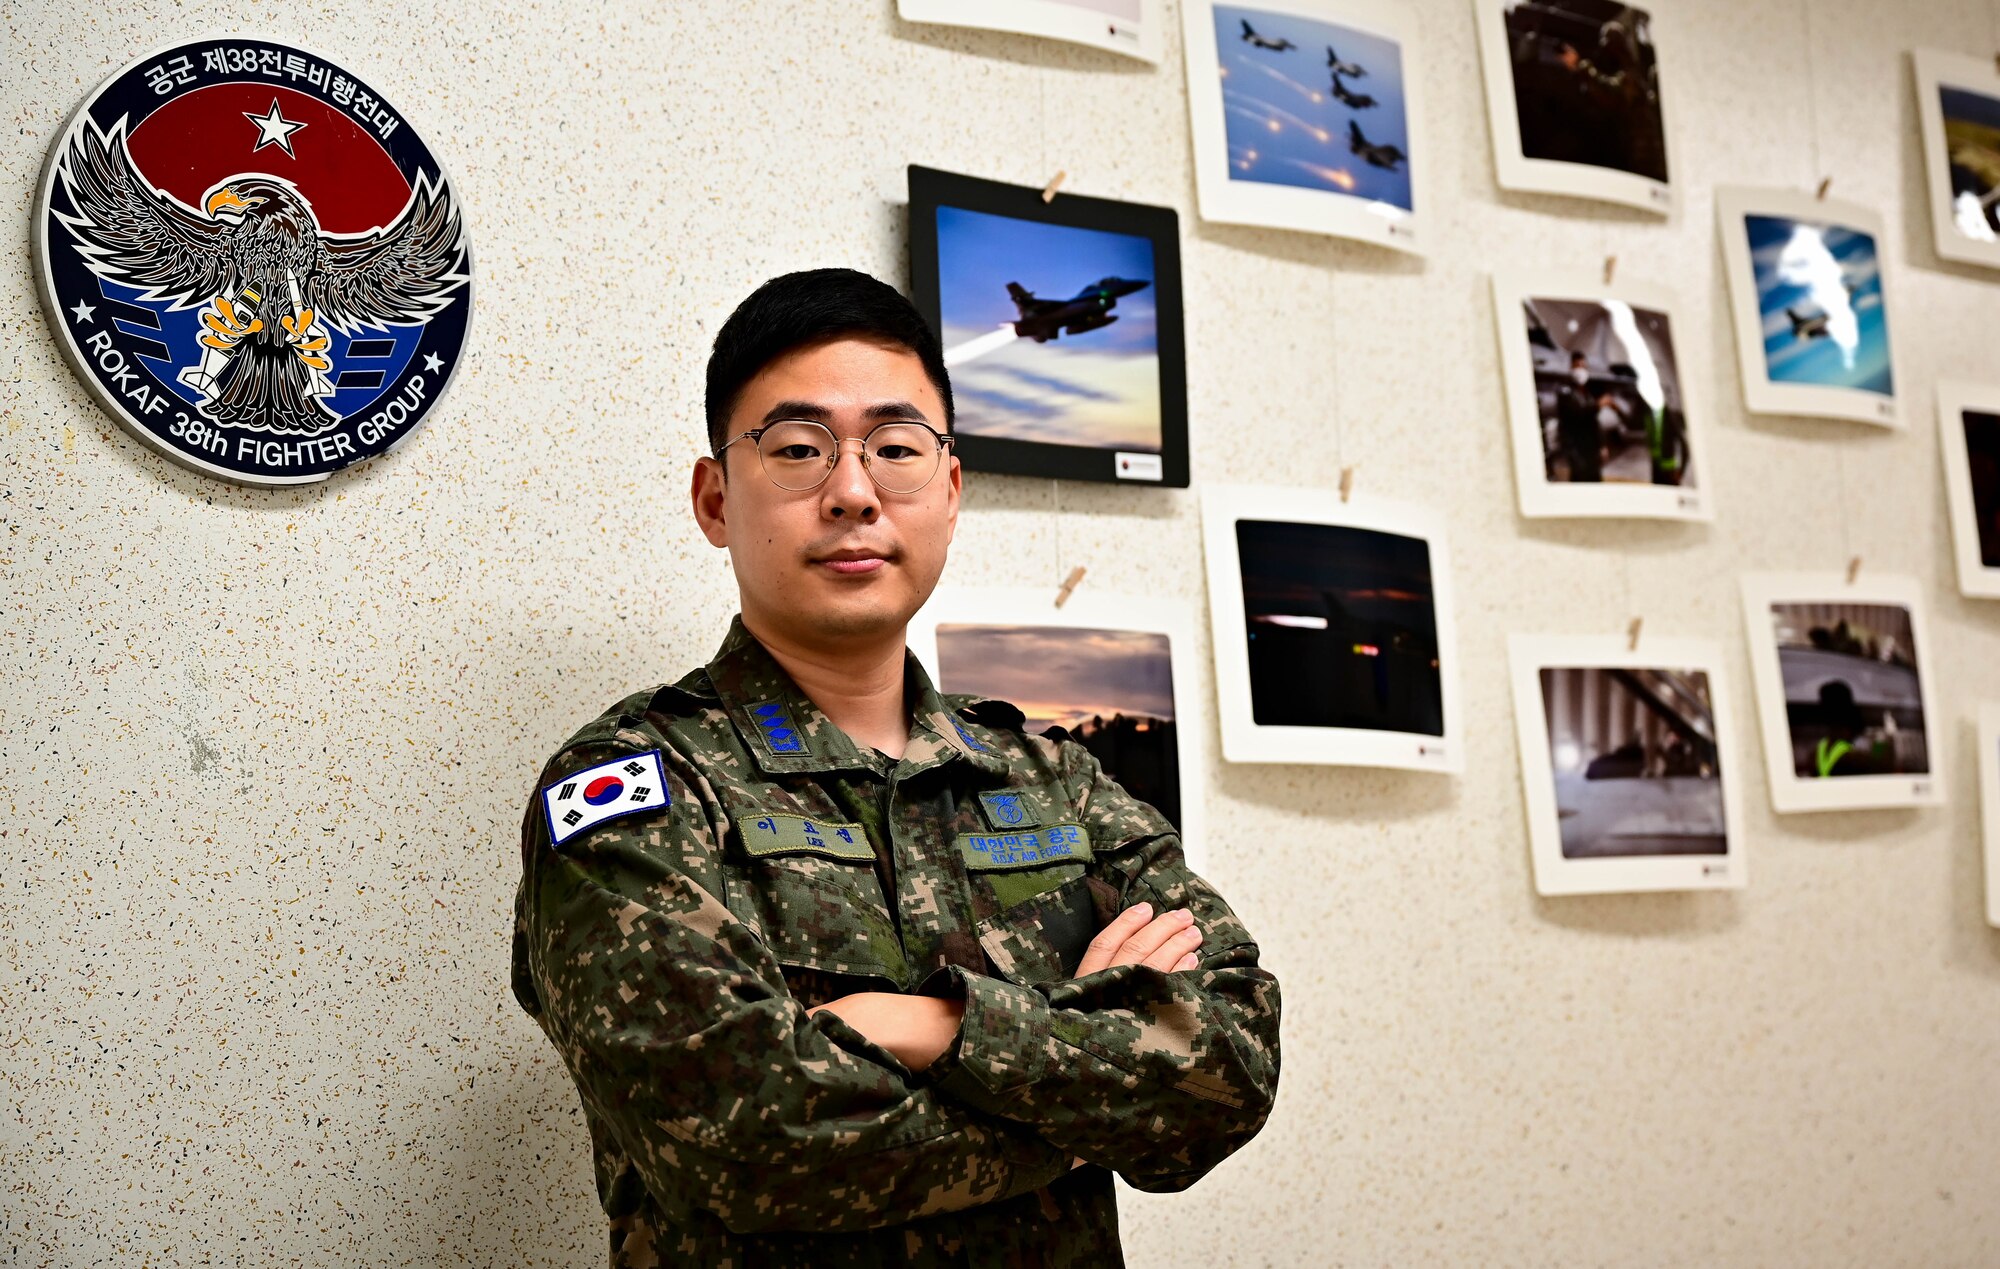 A ROK Airman stands in front of a photo wall with displayed images taken by ROKAF PA and a unit insignia on the wall